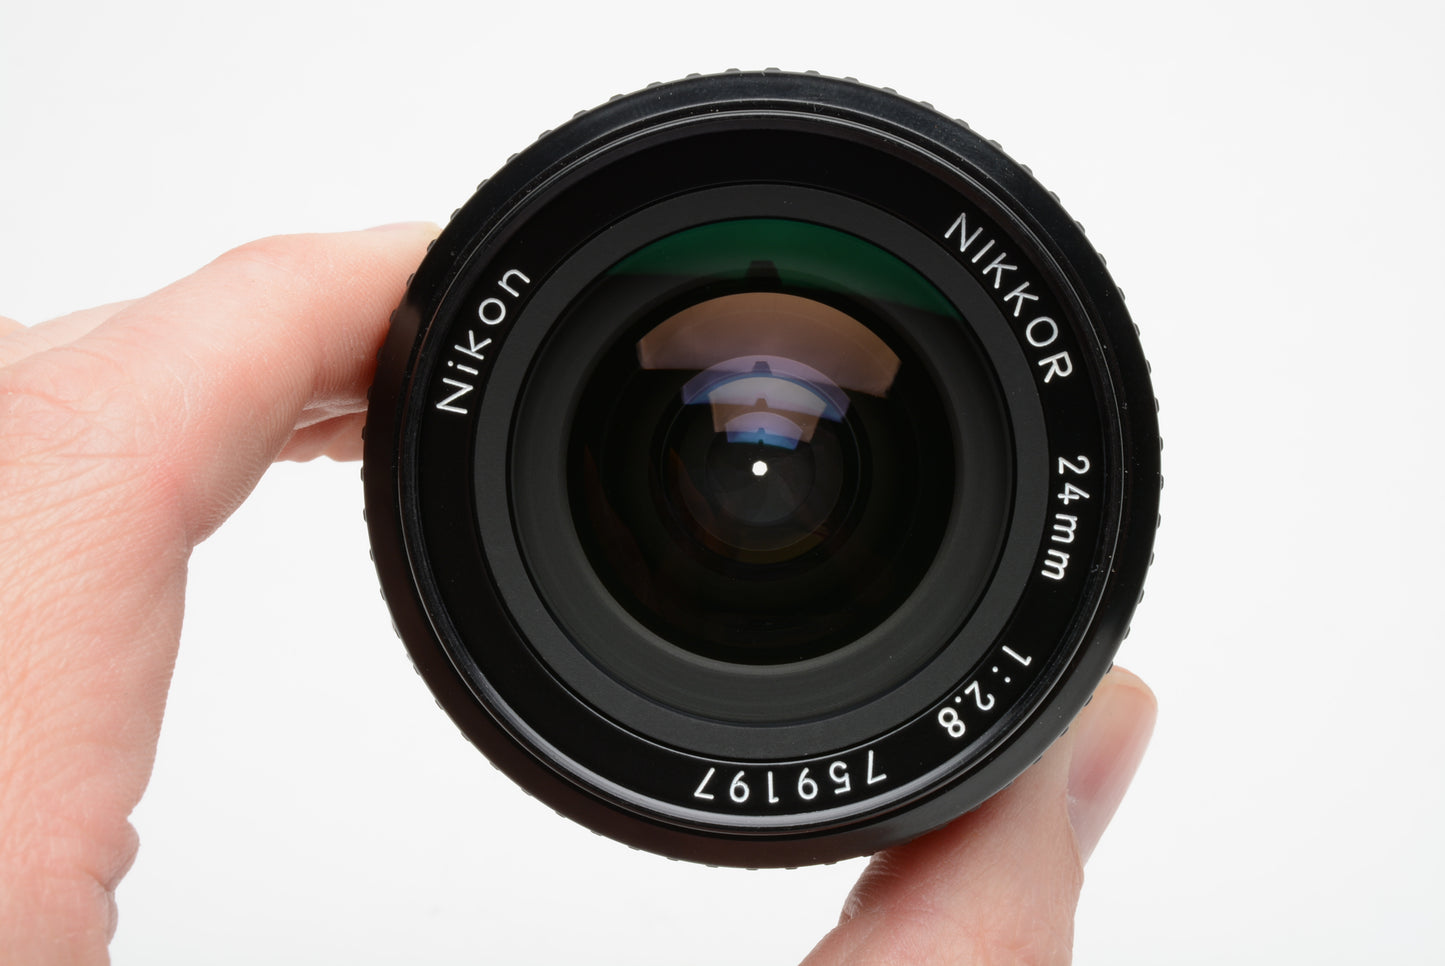 Nikon Nikkor 24mm f2.8 AIS wide angle lens, very clean and sharp!